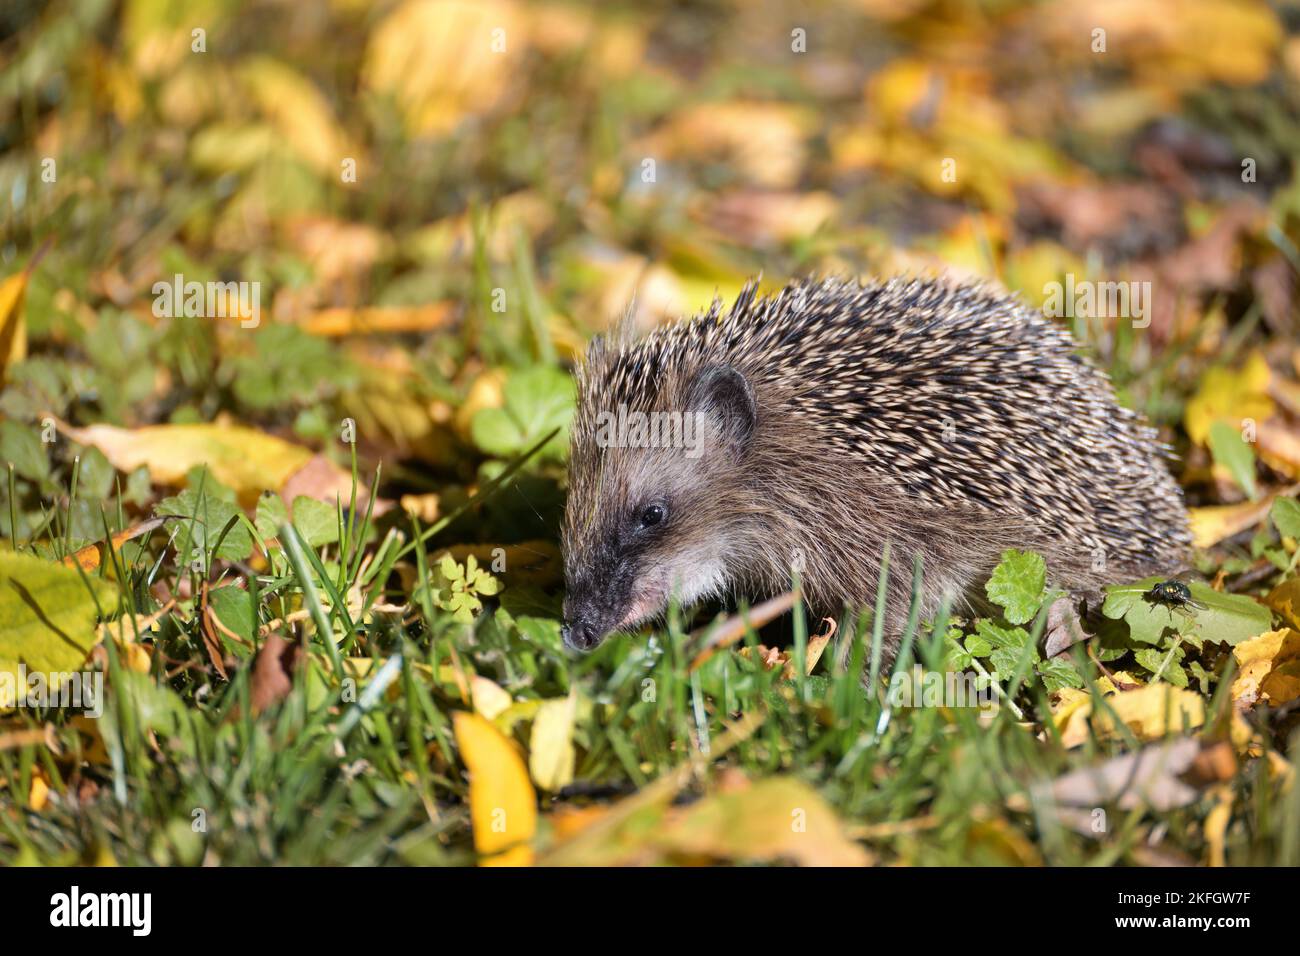 Hedgehog (Erinaceus europaeus) on a meadow with autumn leaves looking for food before winter, wildlife in a natural park or garden, copy space, select Stock Photo